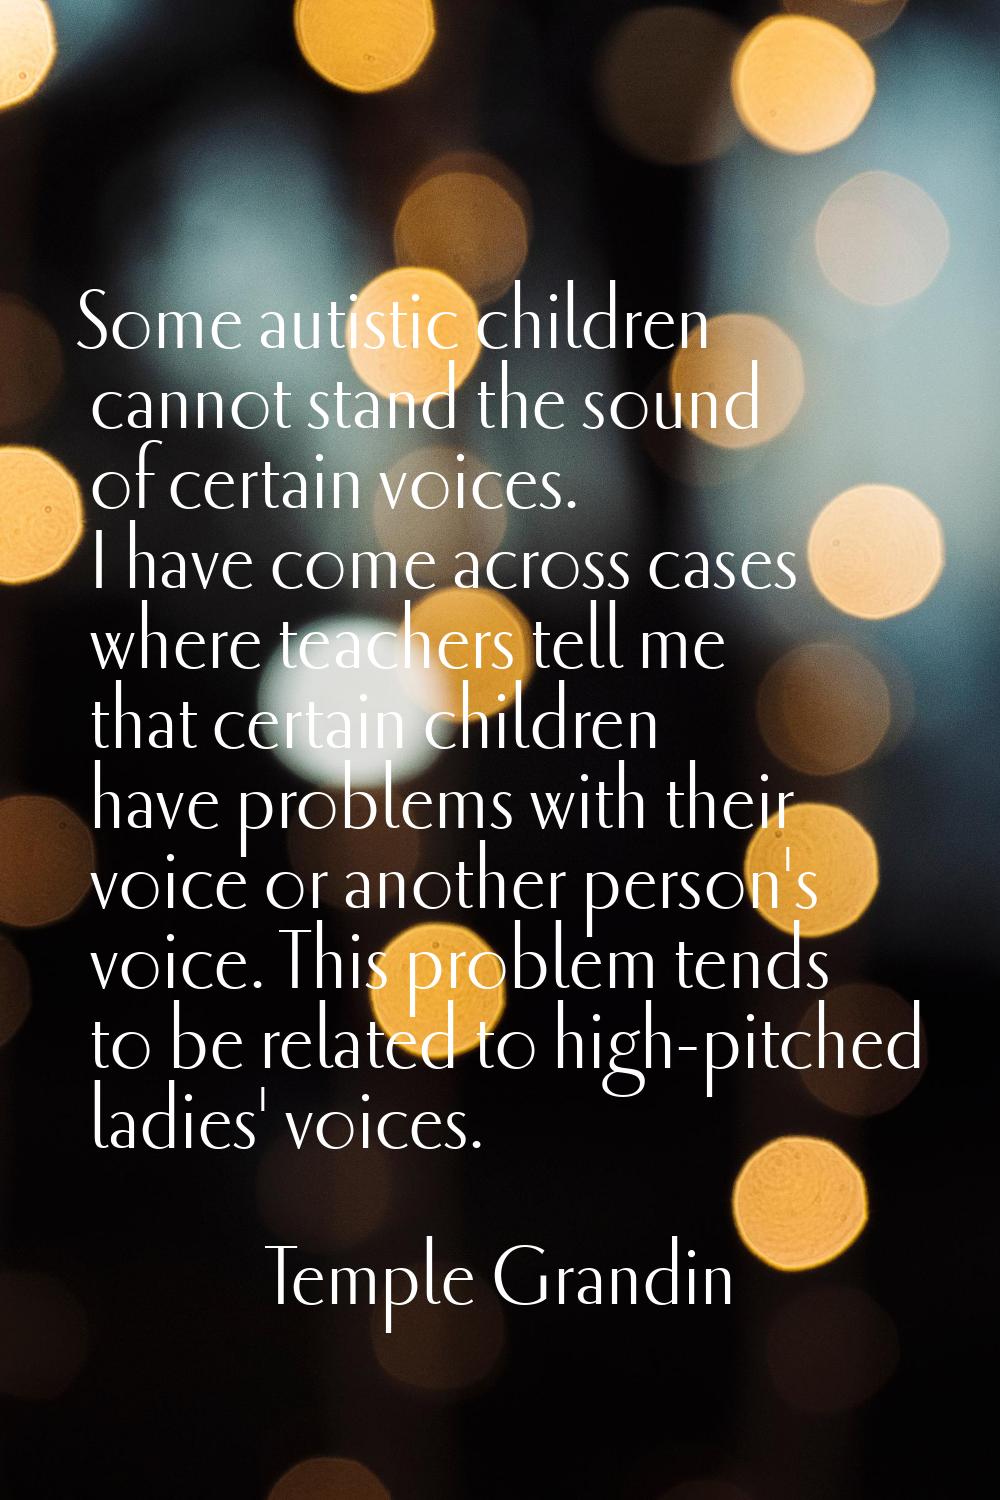 Some autistic children cannot stand the sound of certain voices. I have come across cases where tea